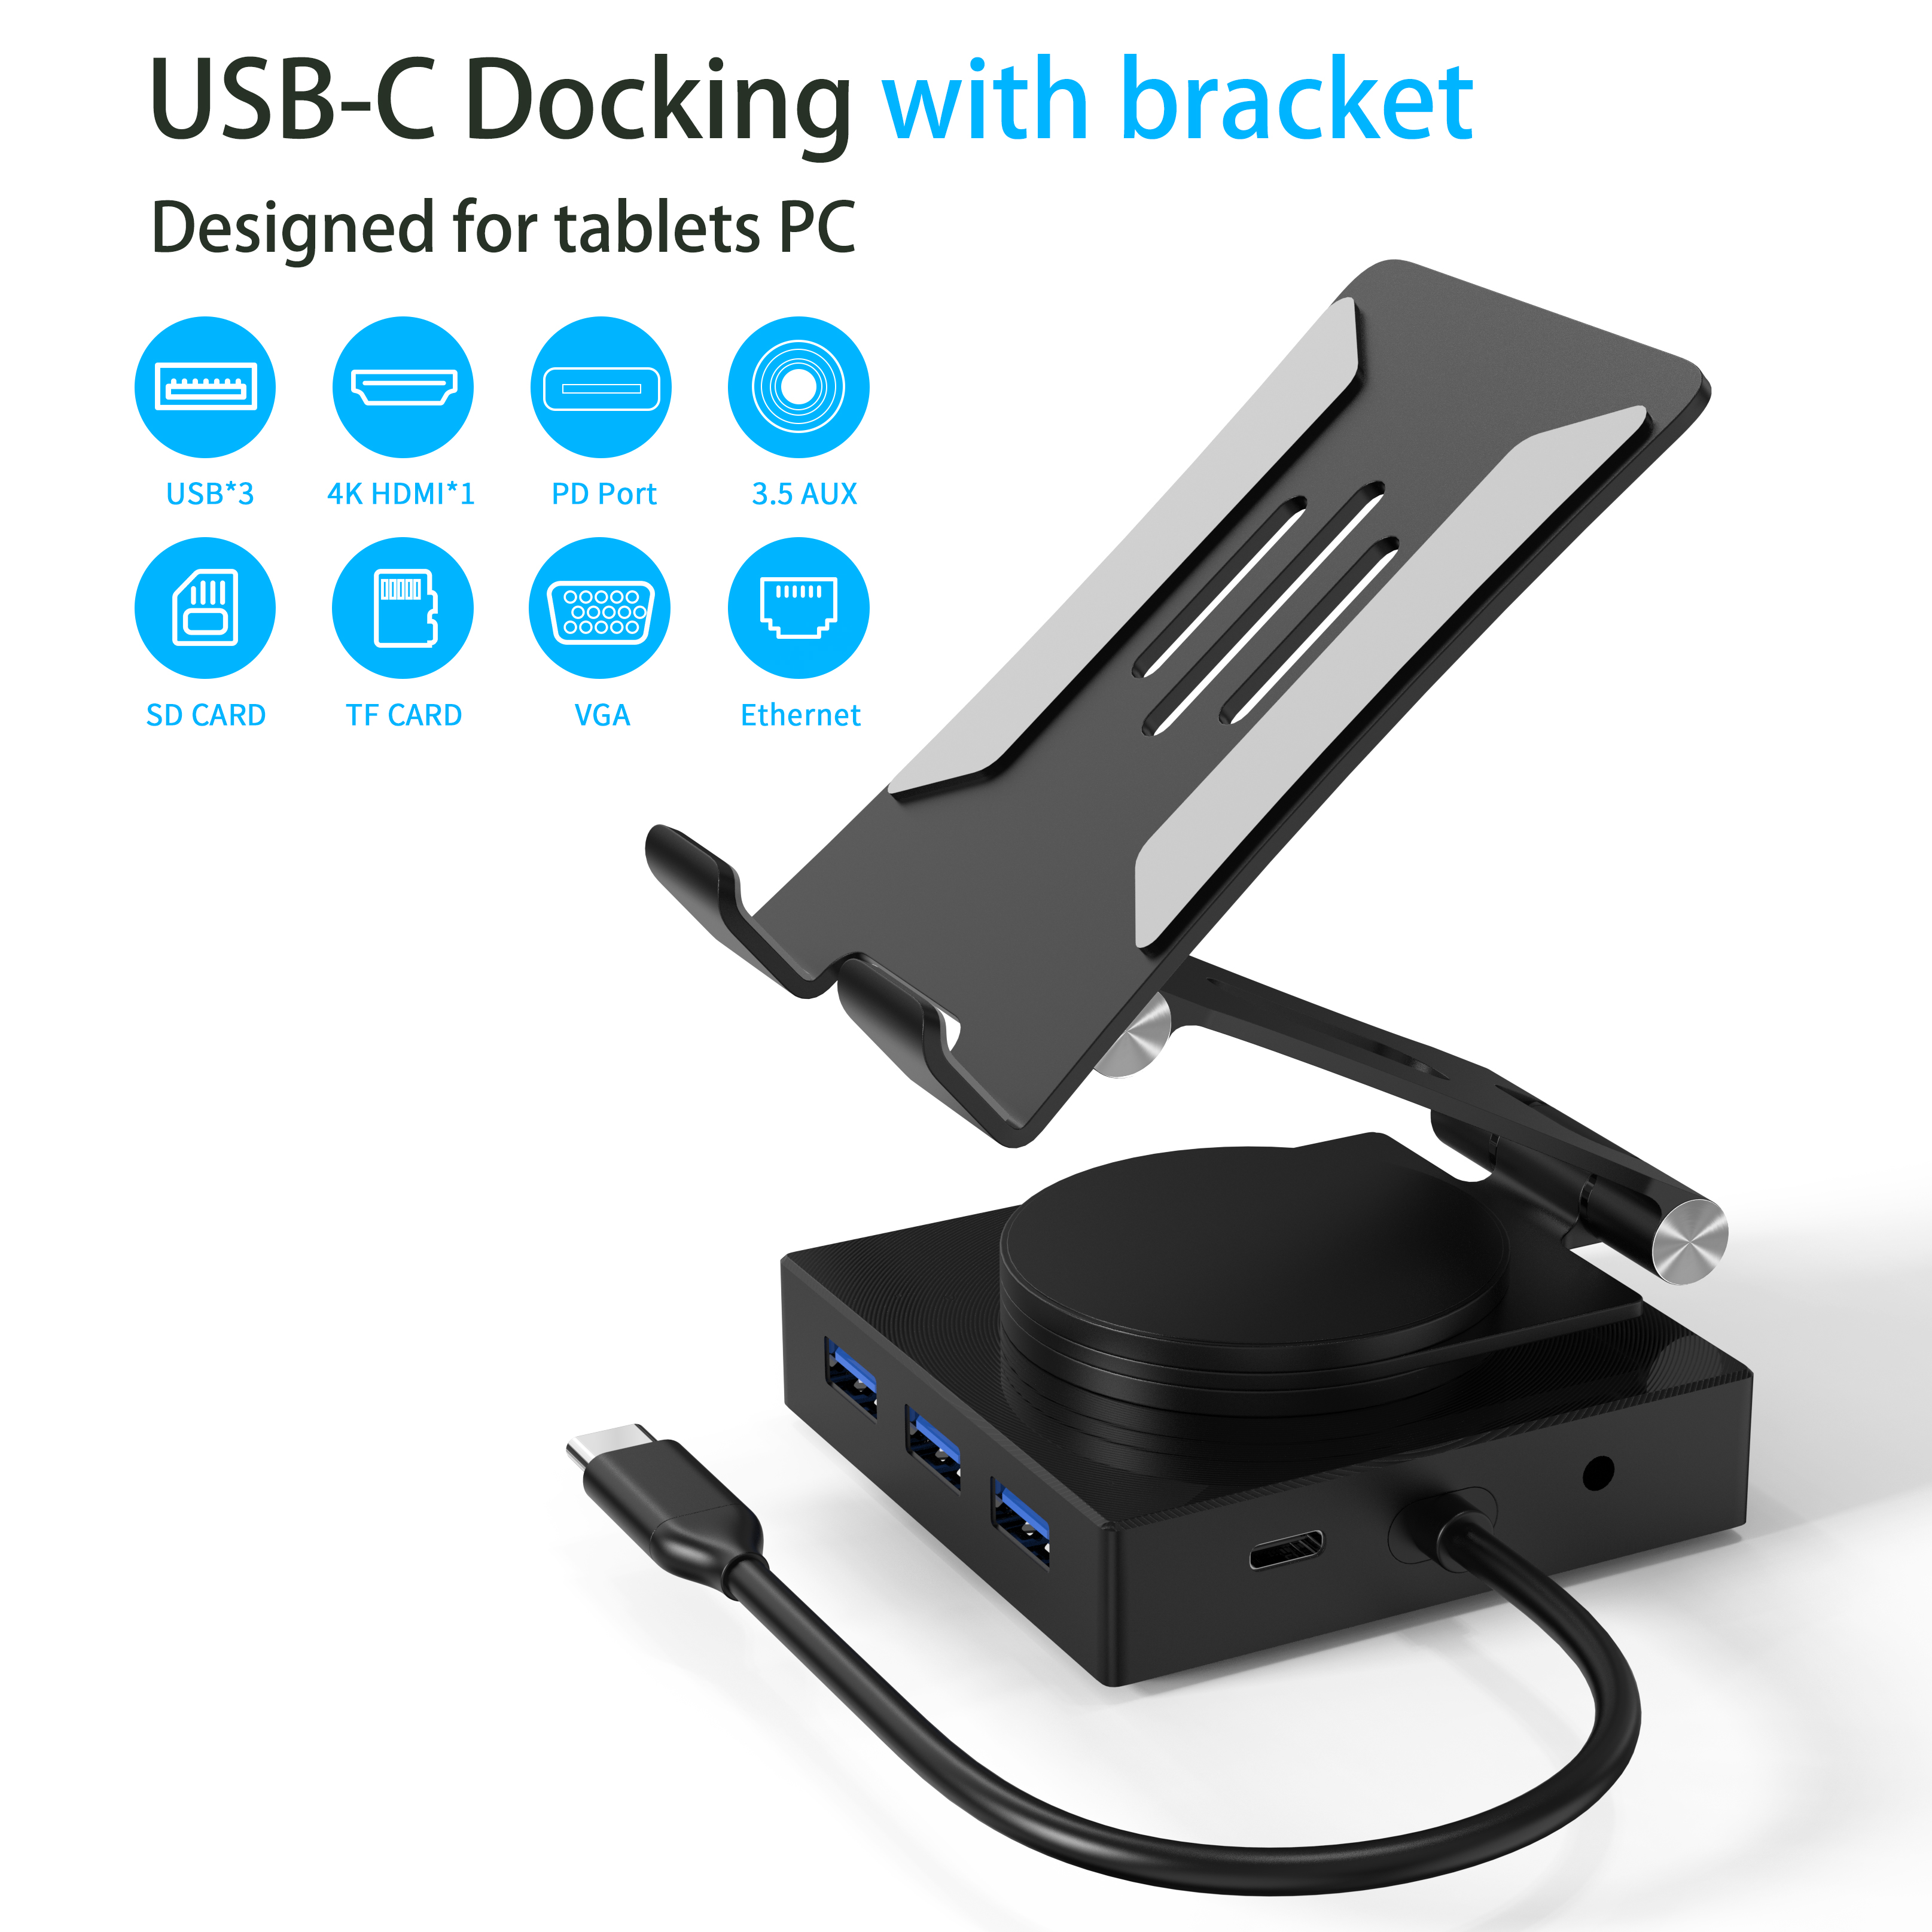 10 IN 1 USB C HUB with HDMI 4K + VGA + PD 100W + 3 x USB A 3.0 + RJ45 1000Mbps + 3.5mm AUX + SD + TF memory card reader slot multi port adapter docking station